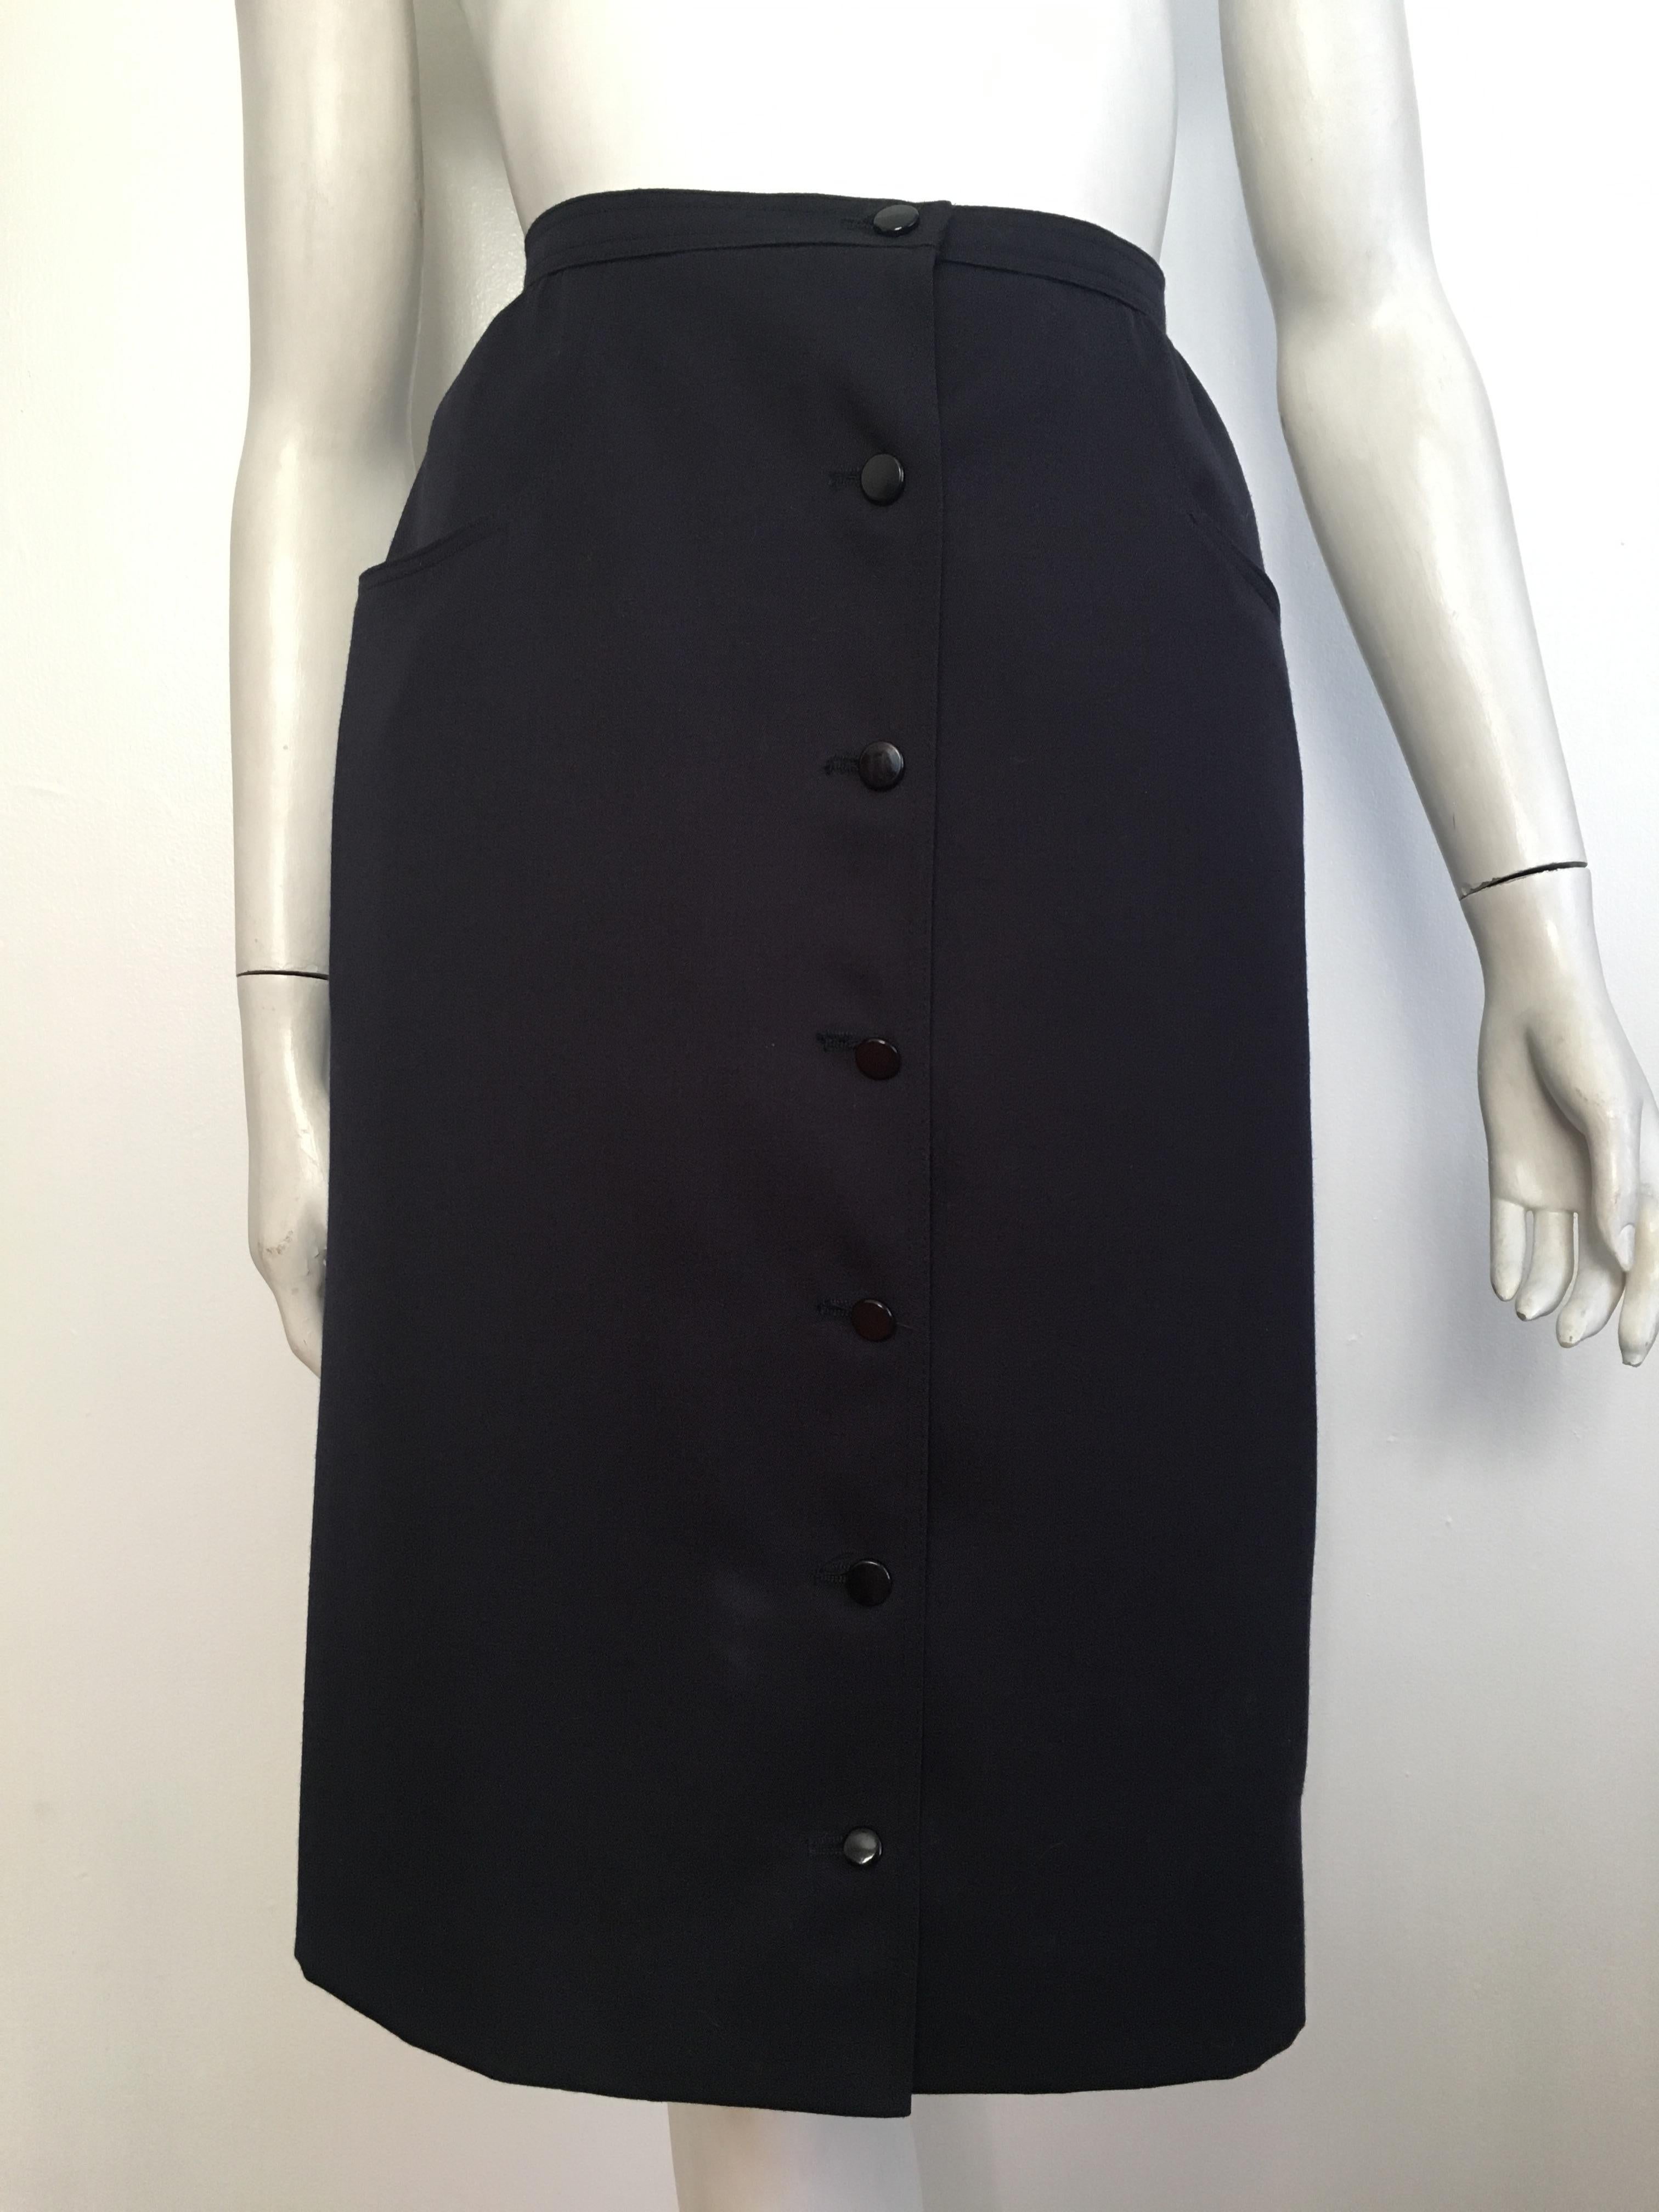 Valentino 1980s Navy Wool Wrap Skirt with Pockets Size 6 / 8. For Sale 3